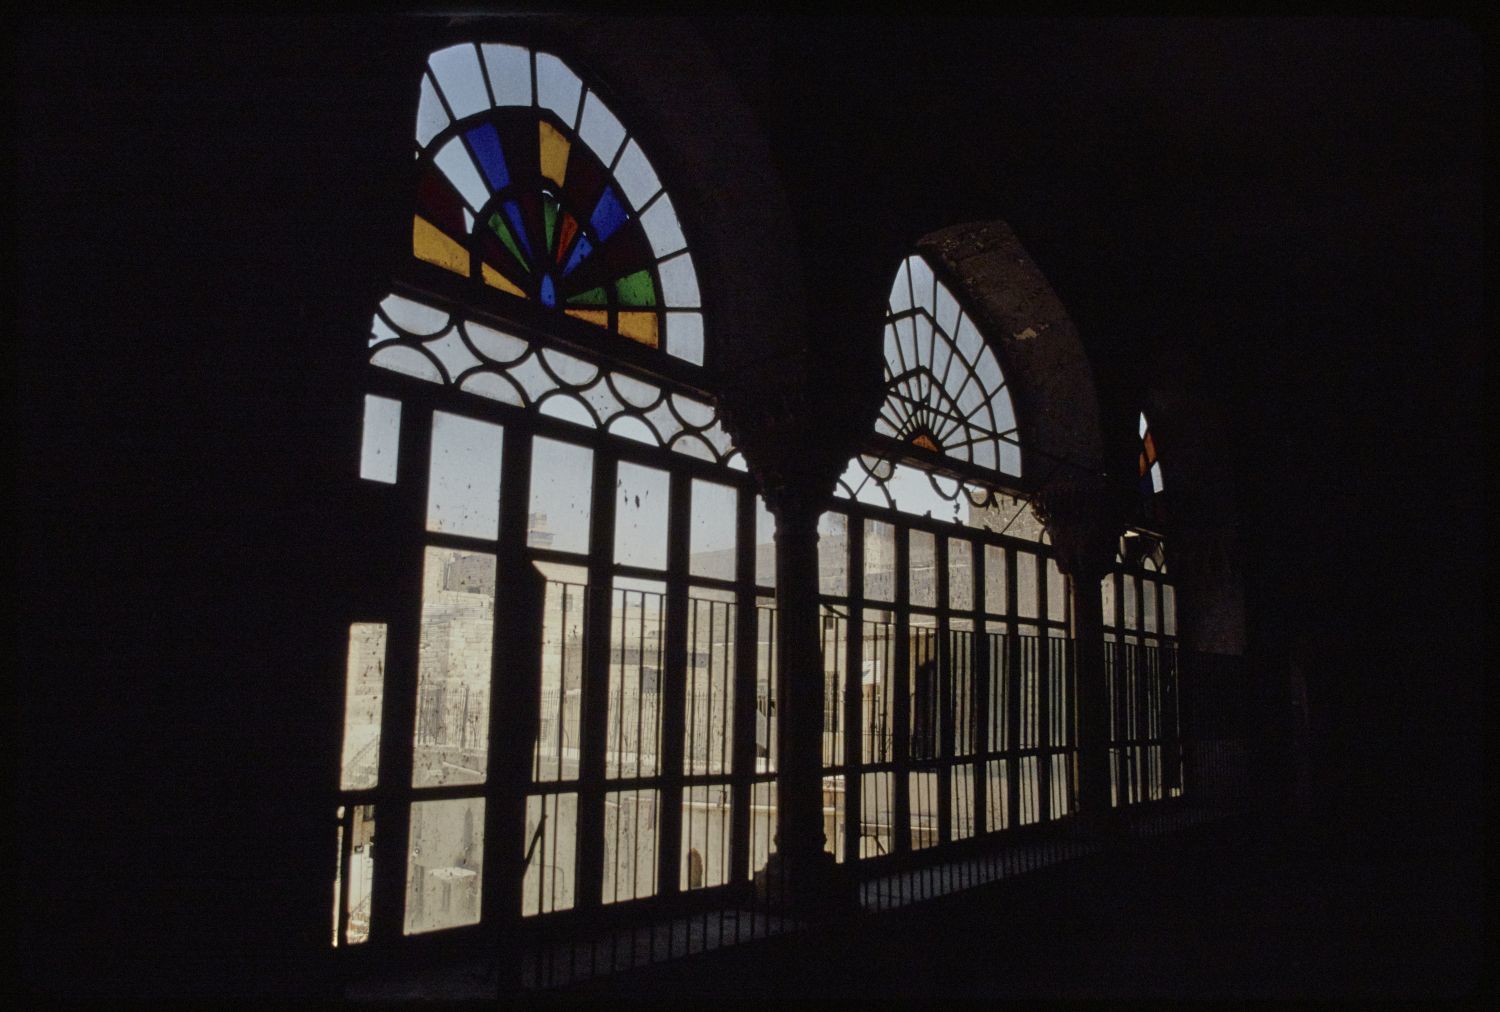 View from within loggia through windows.